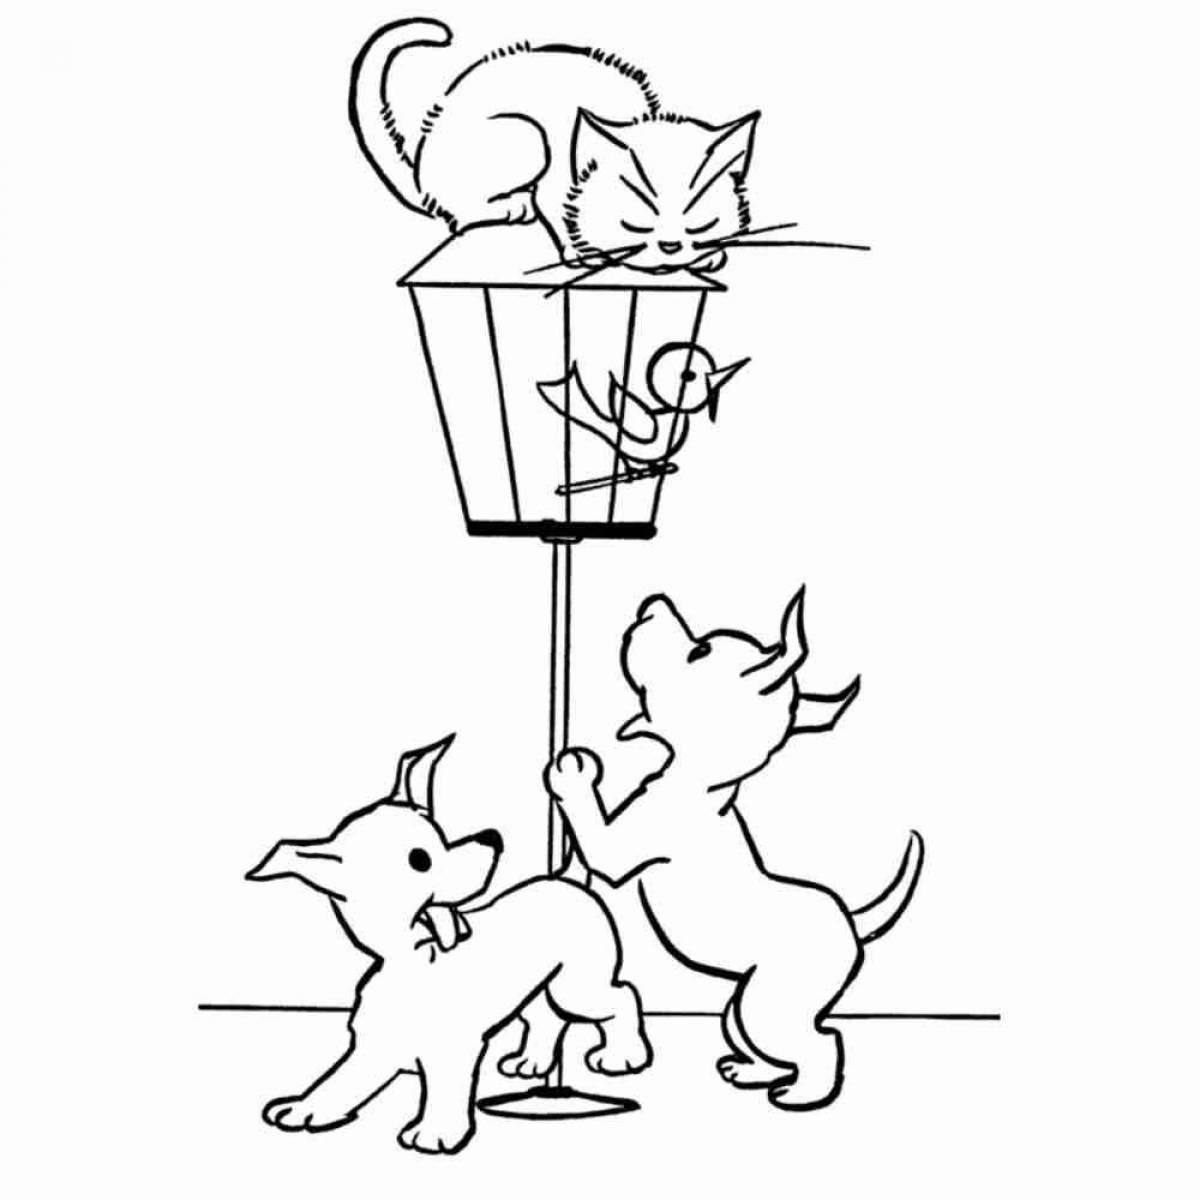 Coloring book of frolicking cats and dogs